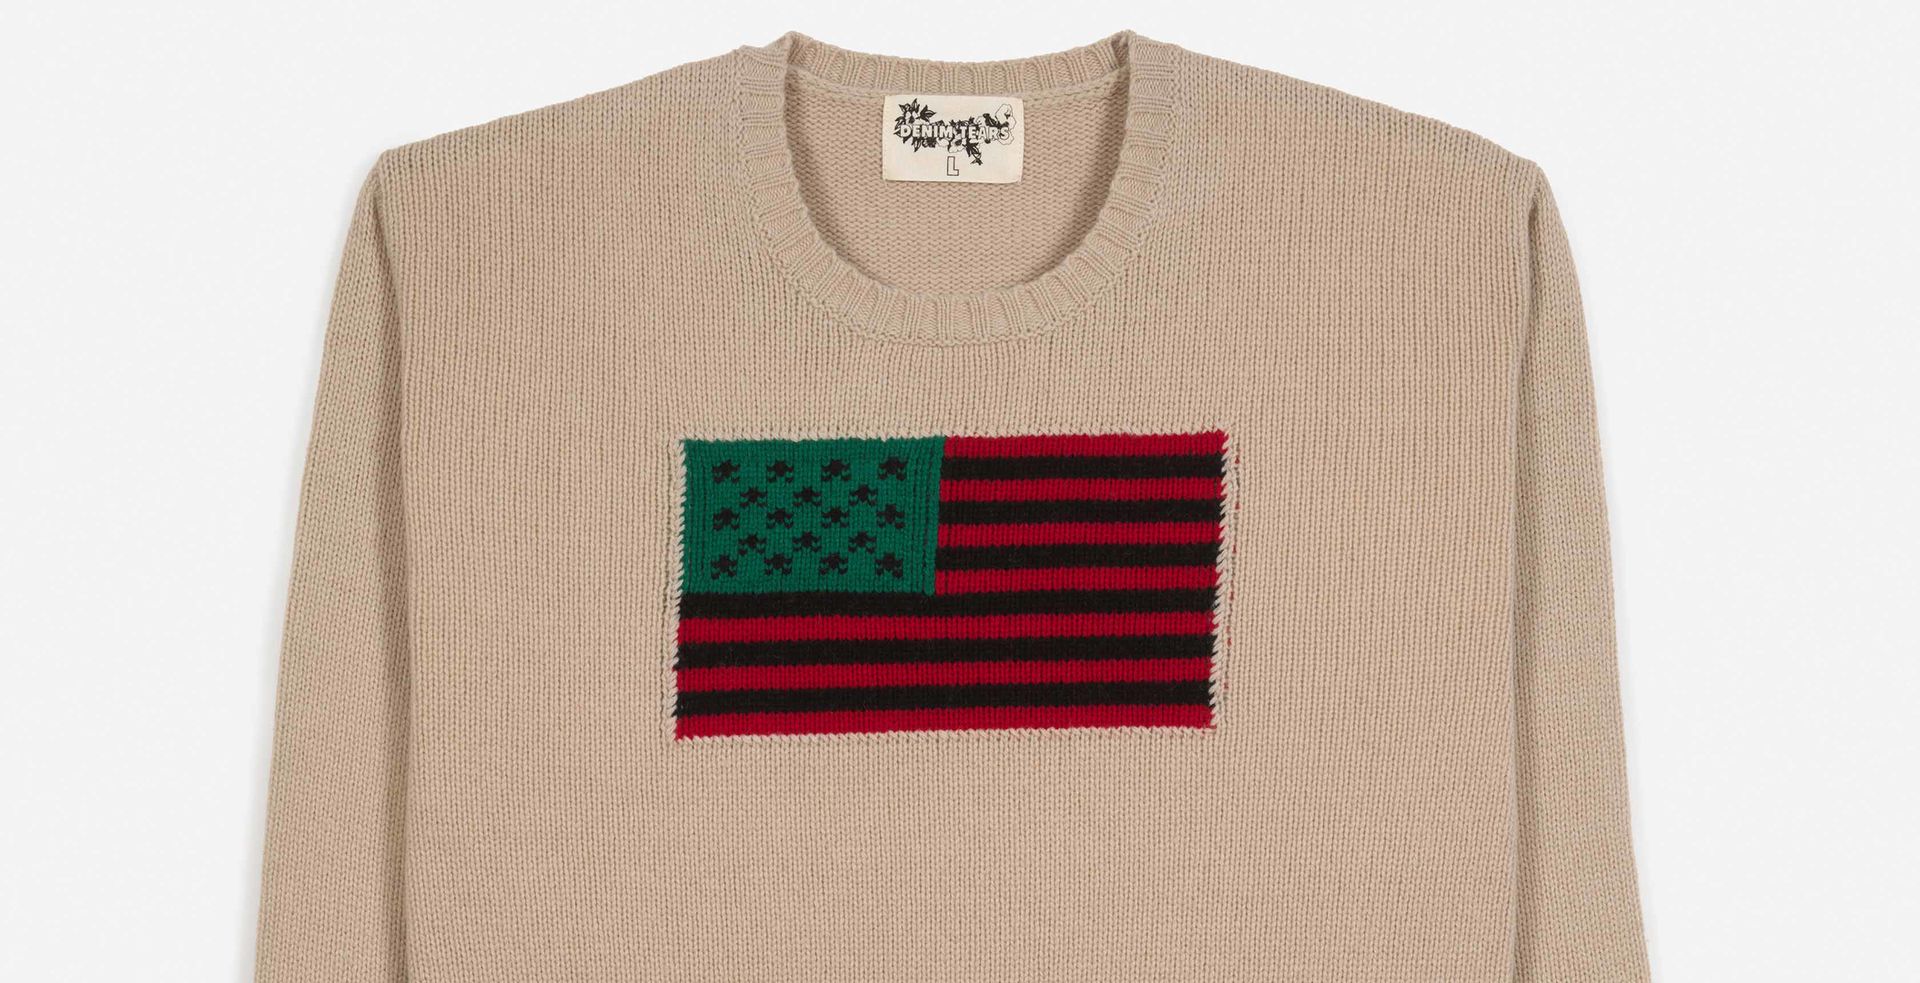 “Tyson Beckford” beige crewneck sweater with the Pan African flag